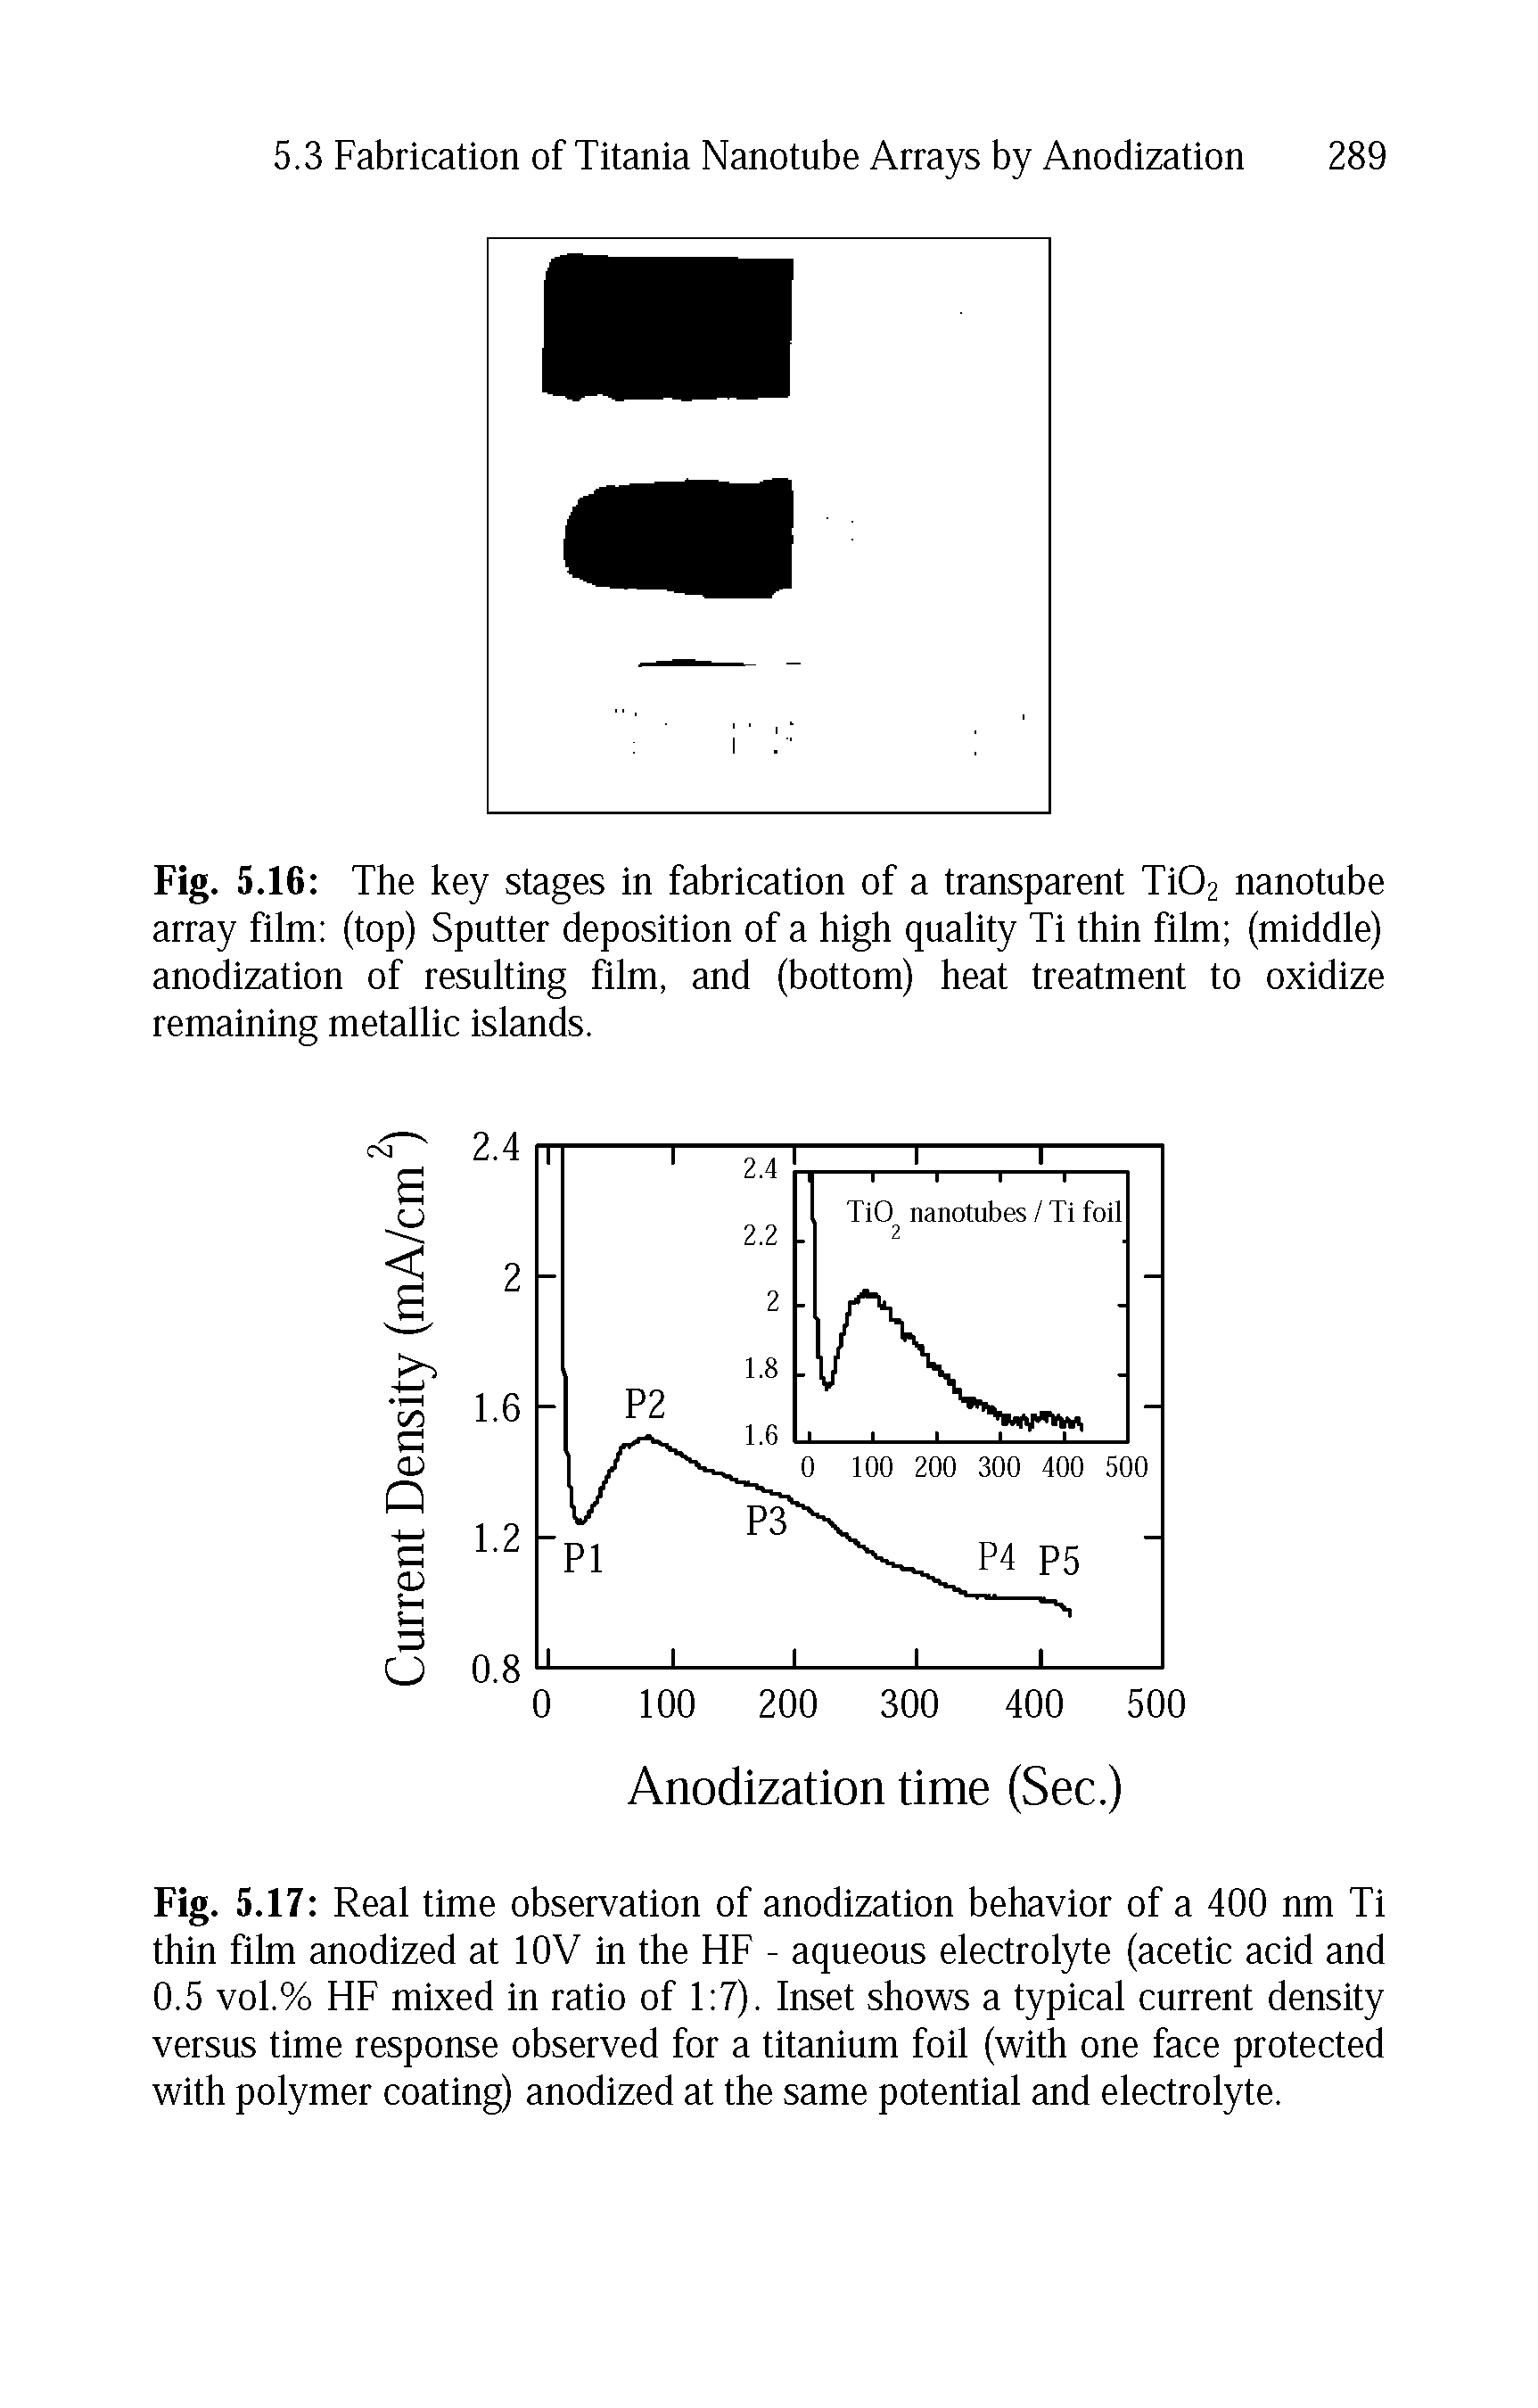 Fig. 5.17 Real time observation of anodization behavior of a 400 nm Ti thin film anodized at lOV in the HF - aqueous electrolyte (acetic acid and 0.5 vol.% HF mixed in ratio of 1 7). Inset shows a typical current density versus time response observed for a titanium foil (with one face protected with polymer coating) anodized at the same potential and electrolyte.